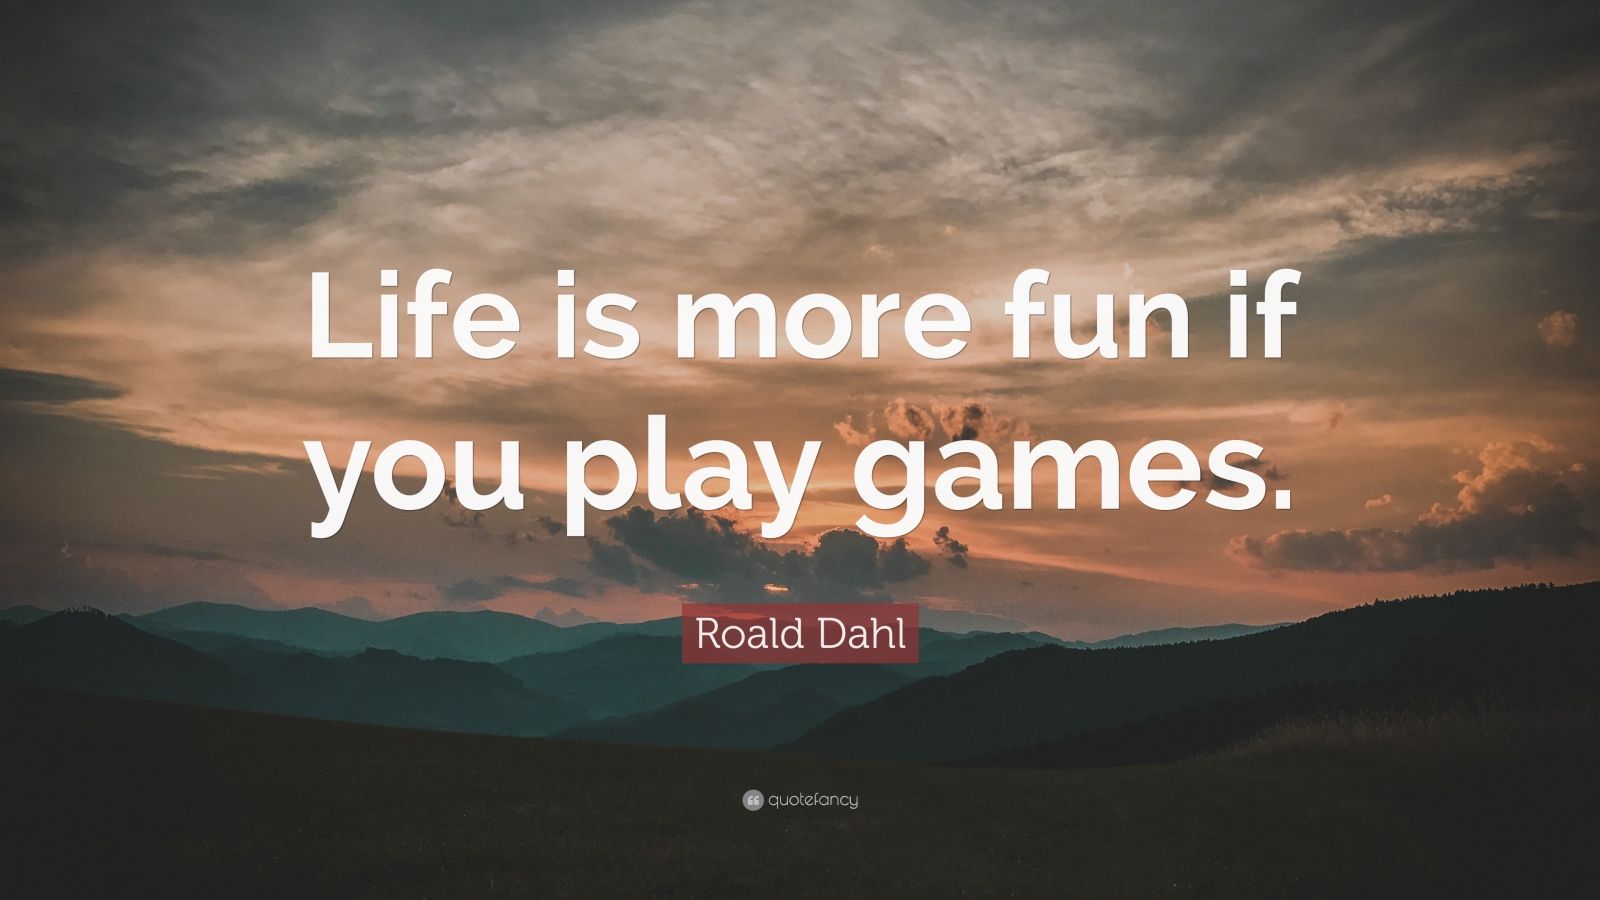 Amazing Life Is A Game Quotes  Don t miss out 